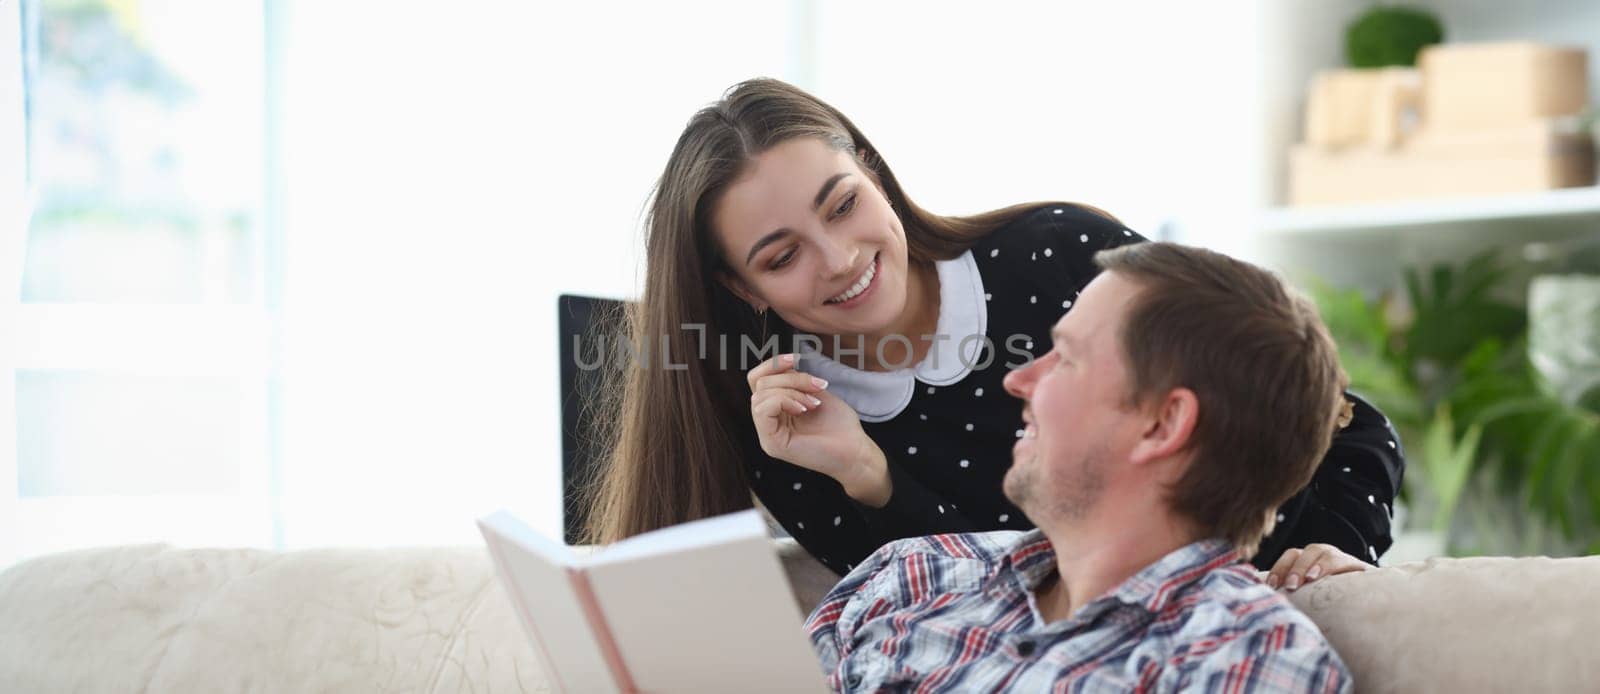 Guy is sitting on couch with book, girl is smiling by kuprevich